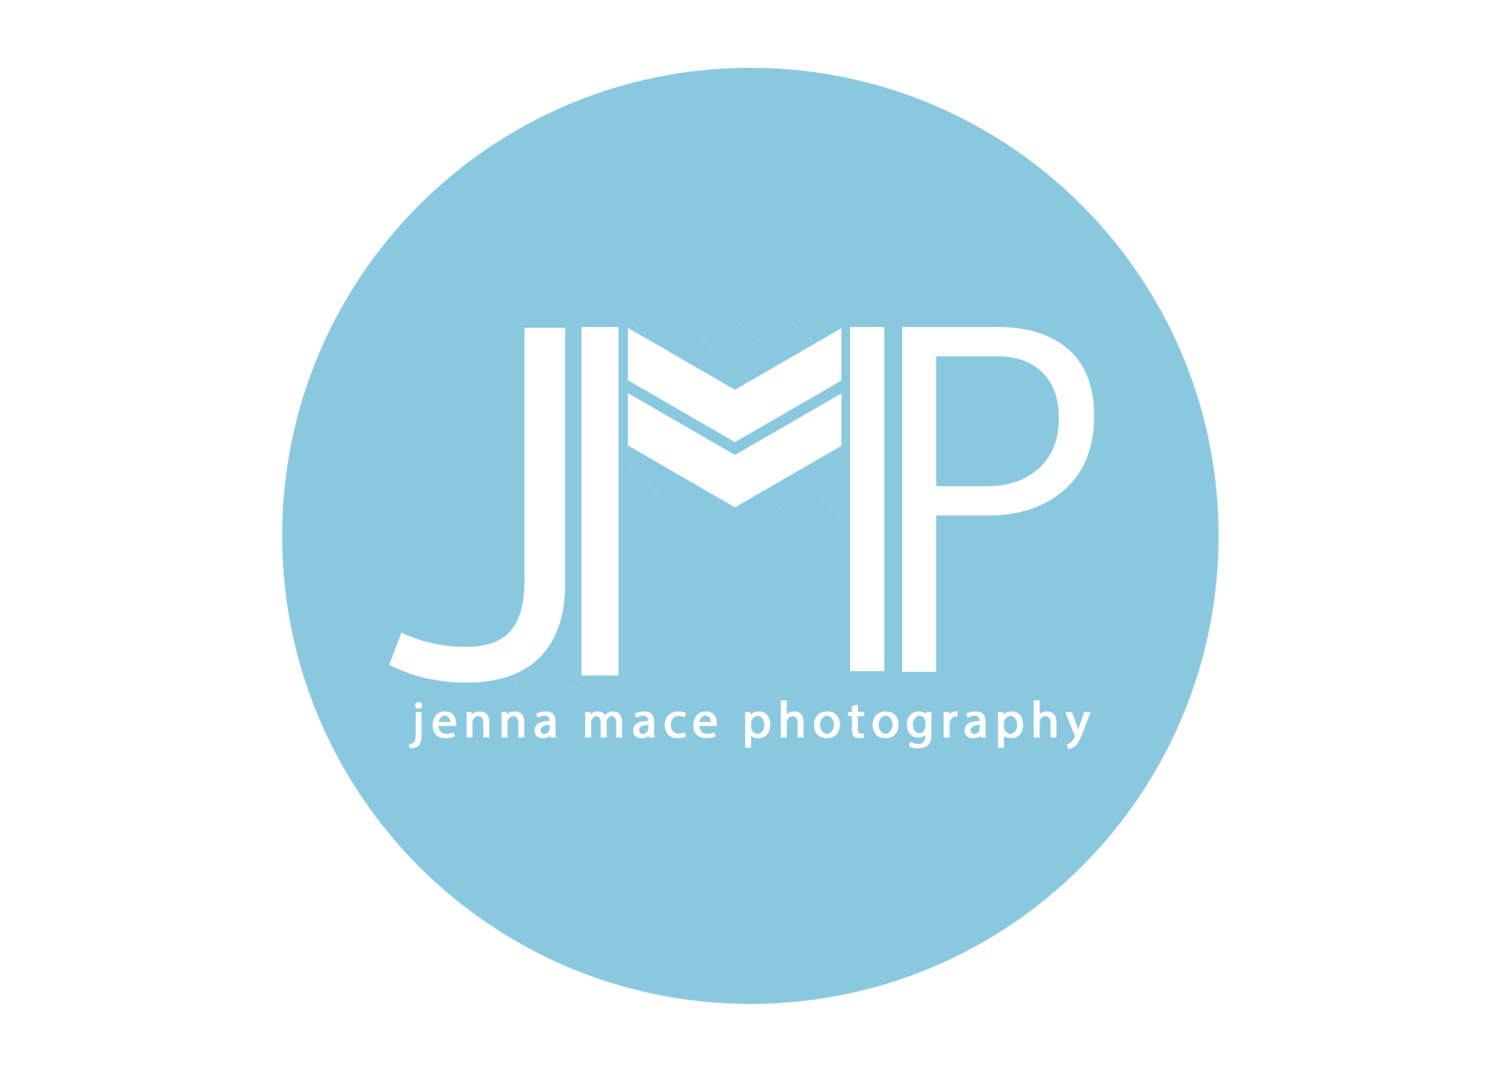 Jenna Mace Photography specializing in emotive lifestyle newborn and family sessions in the Baltimore area